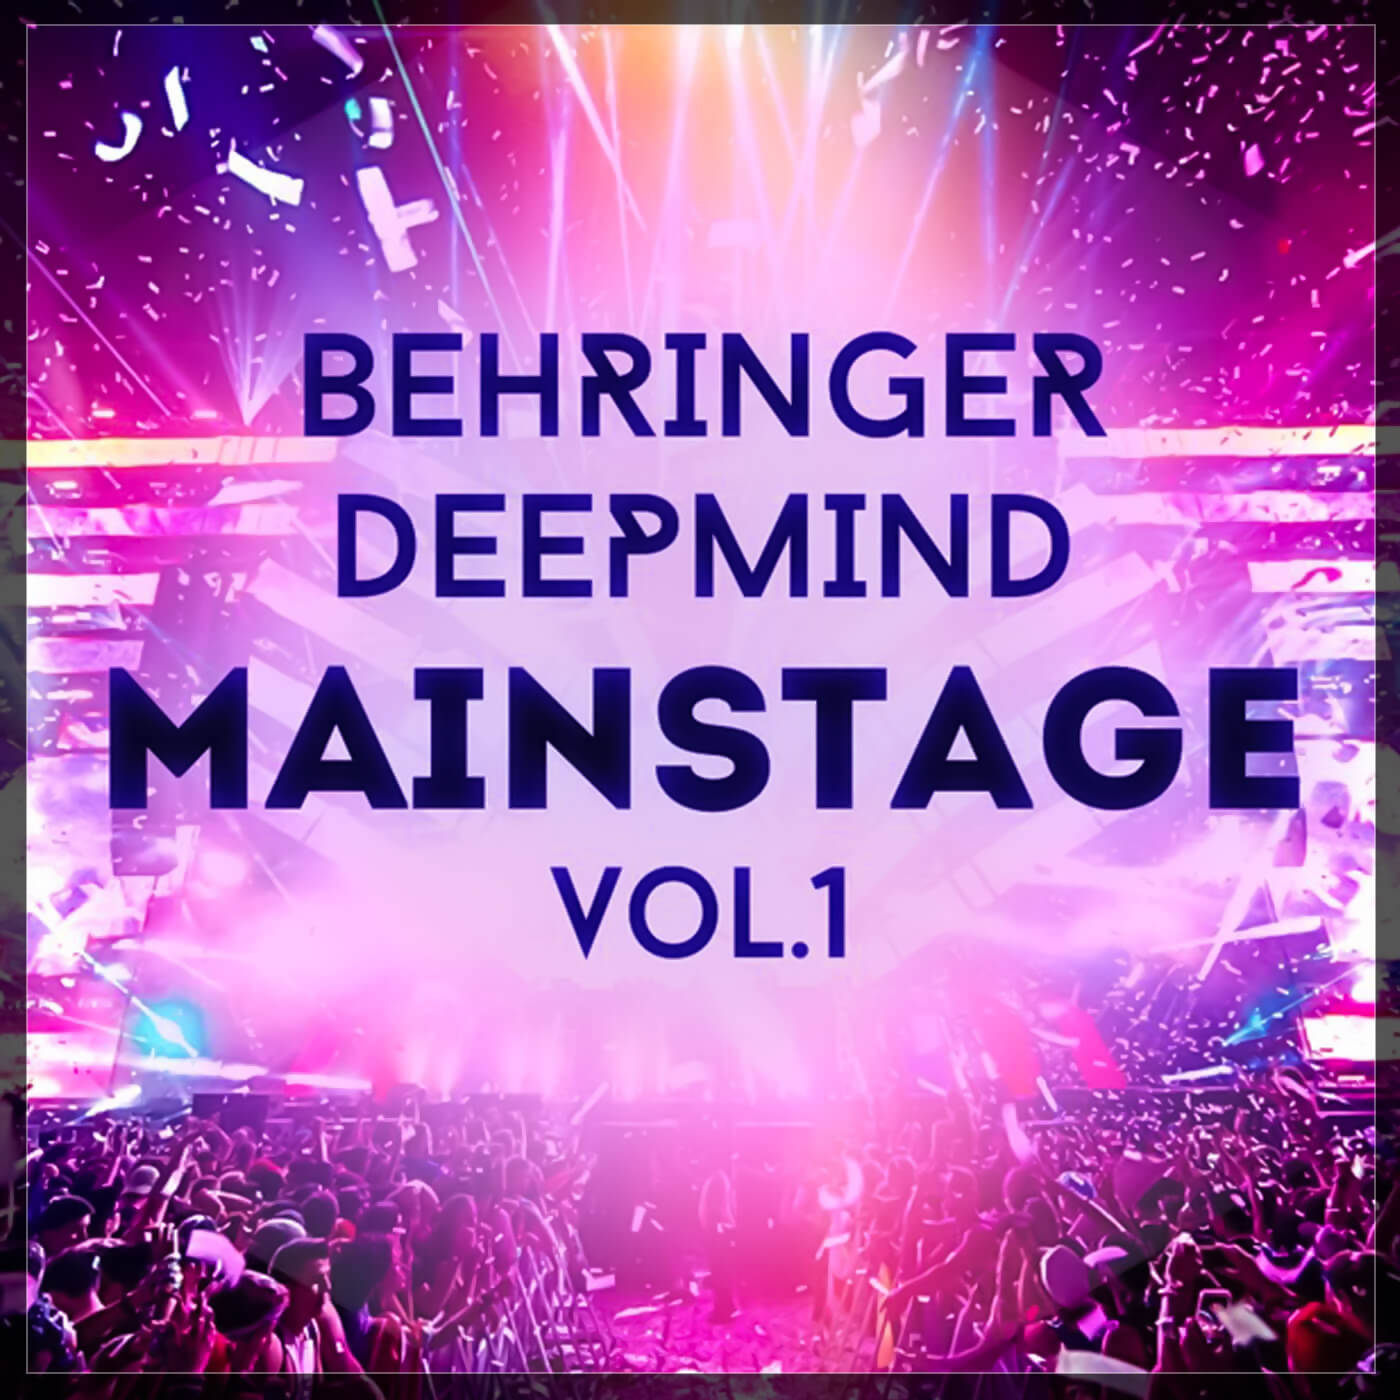 MainStage and house sounds for Behringer Deepmind